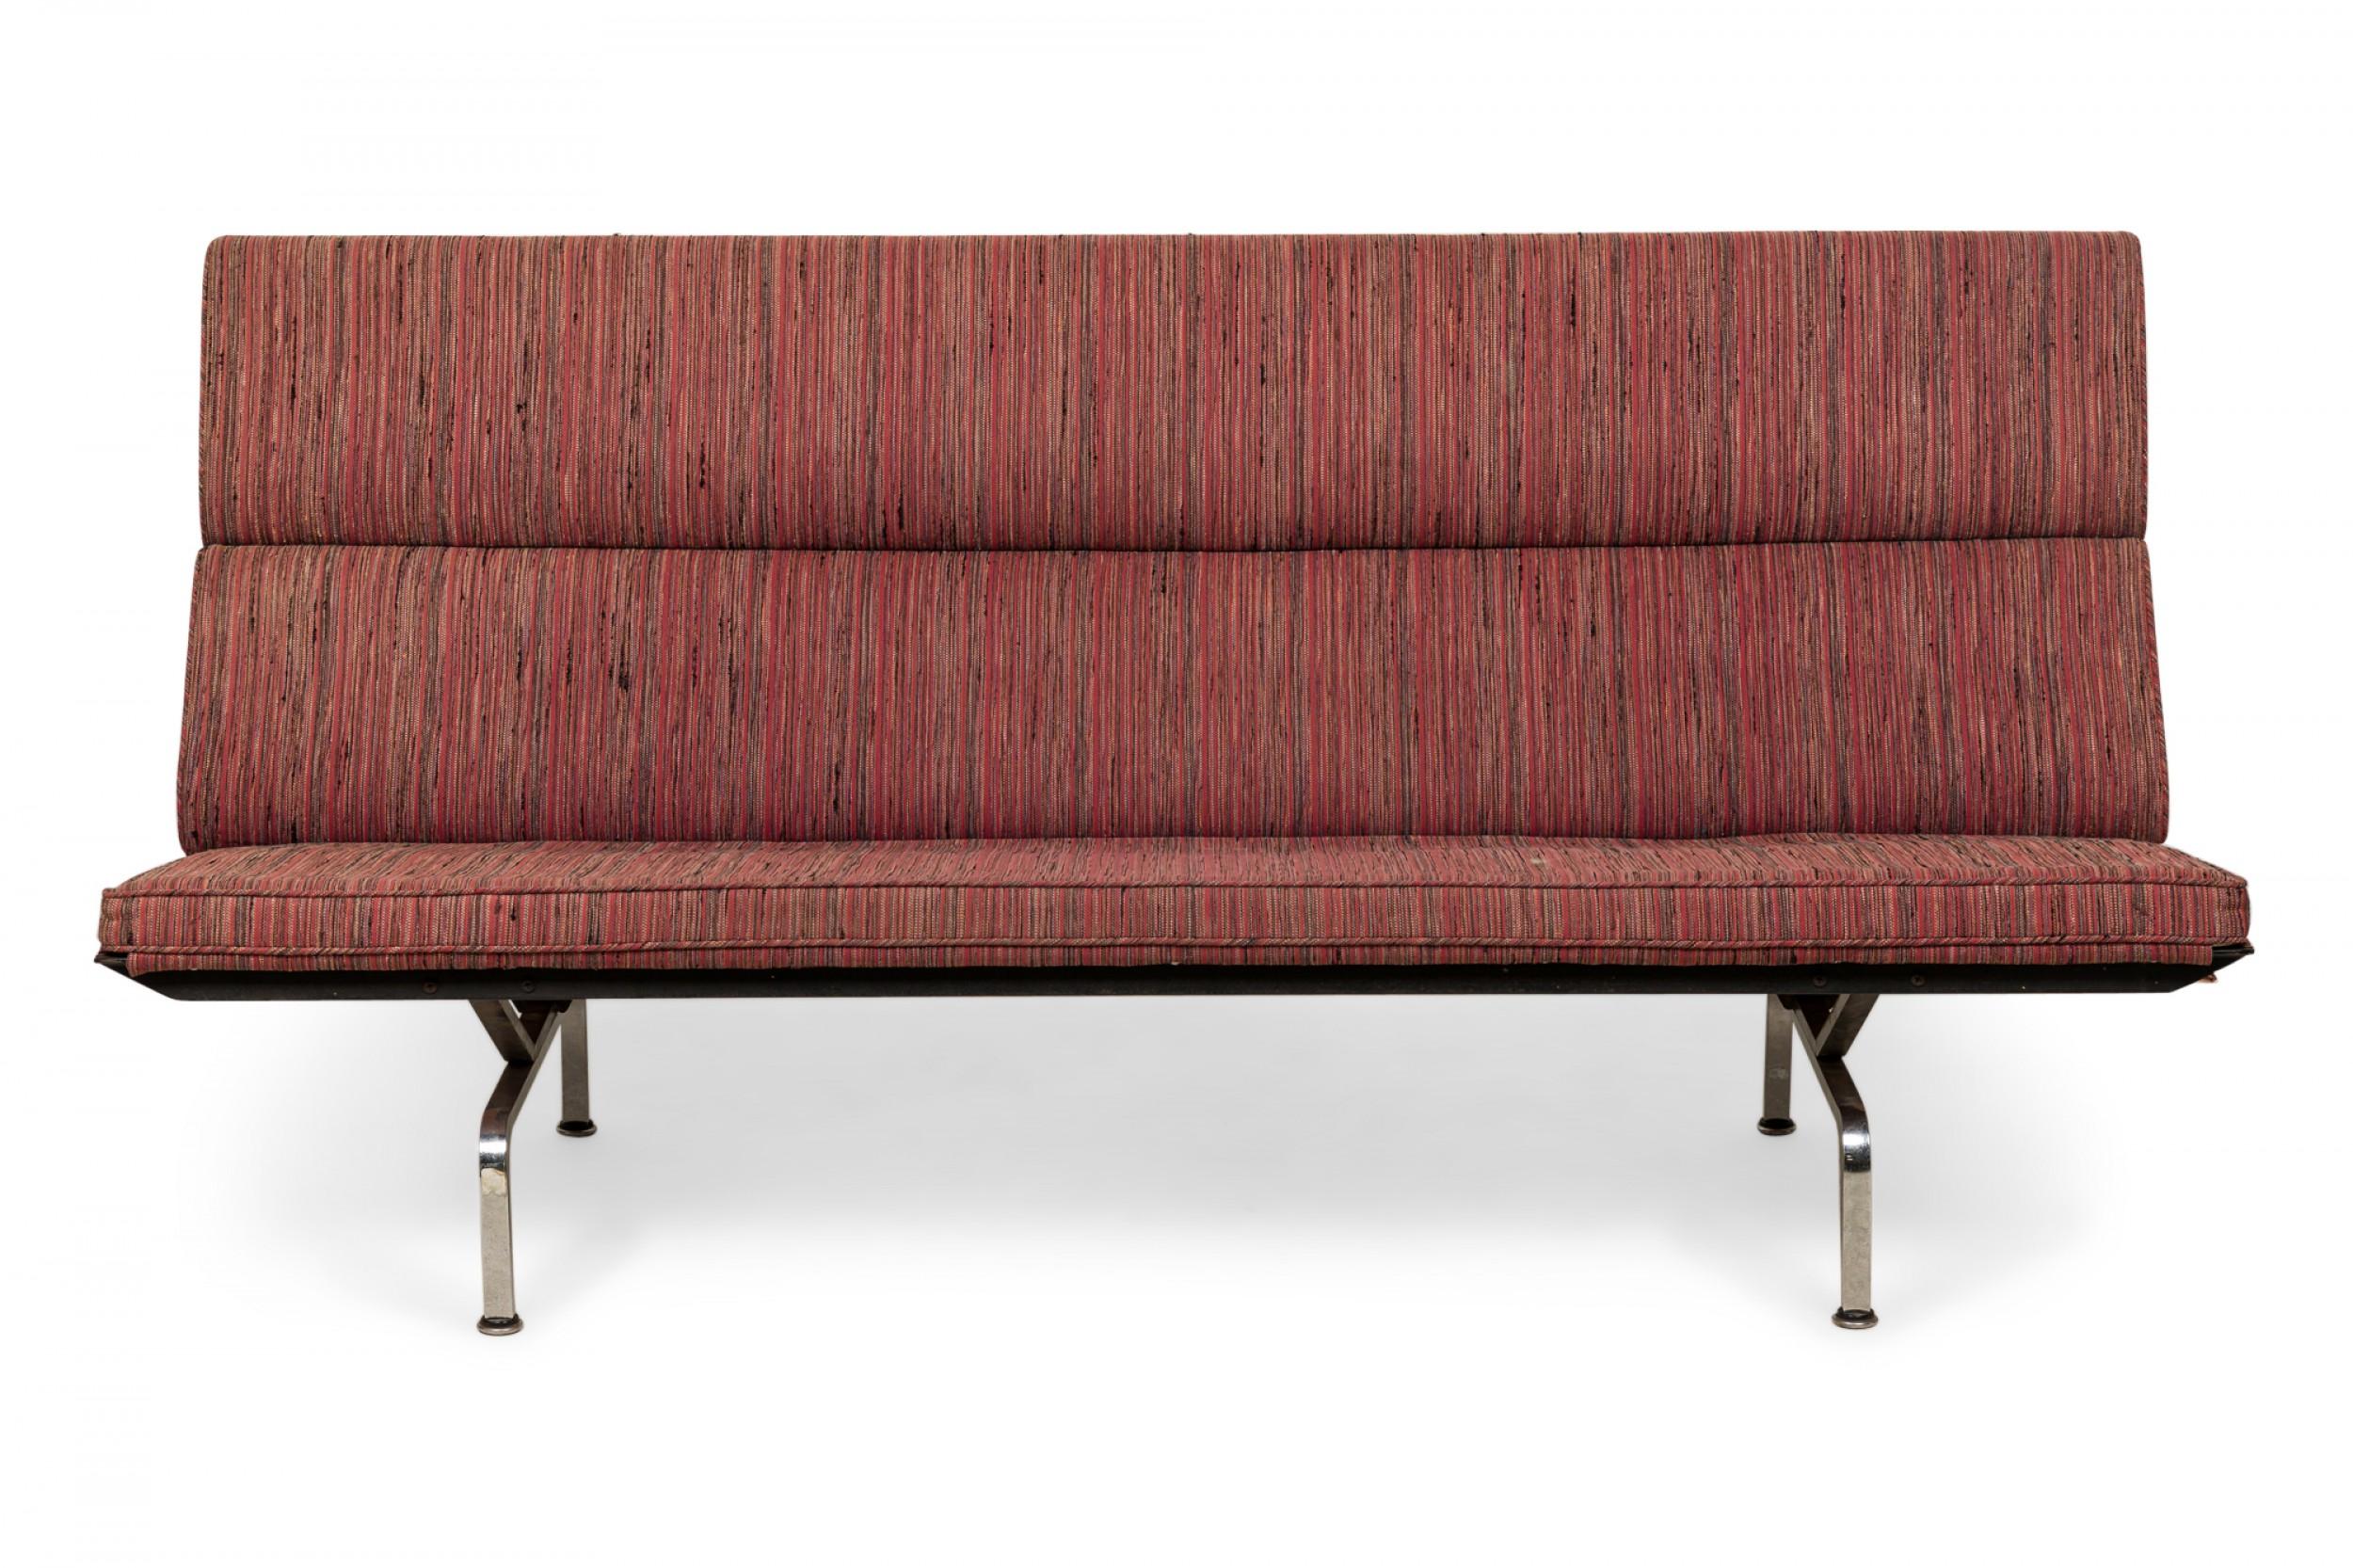 American Mid-Century 'Sofa Compact' folding sofa / settee with red, pink, and orange vertically striped fabric upholstered cushions, resting on four curved chrome legs. (Charles Eames for Herman Miller).
   